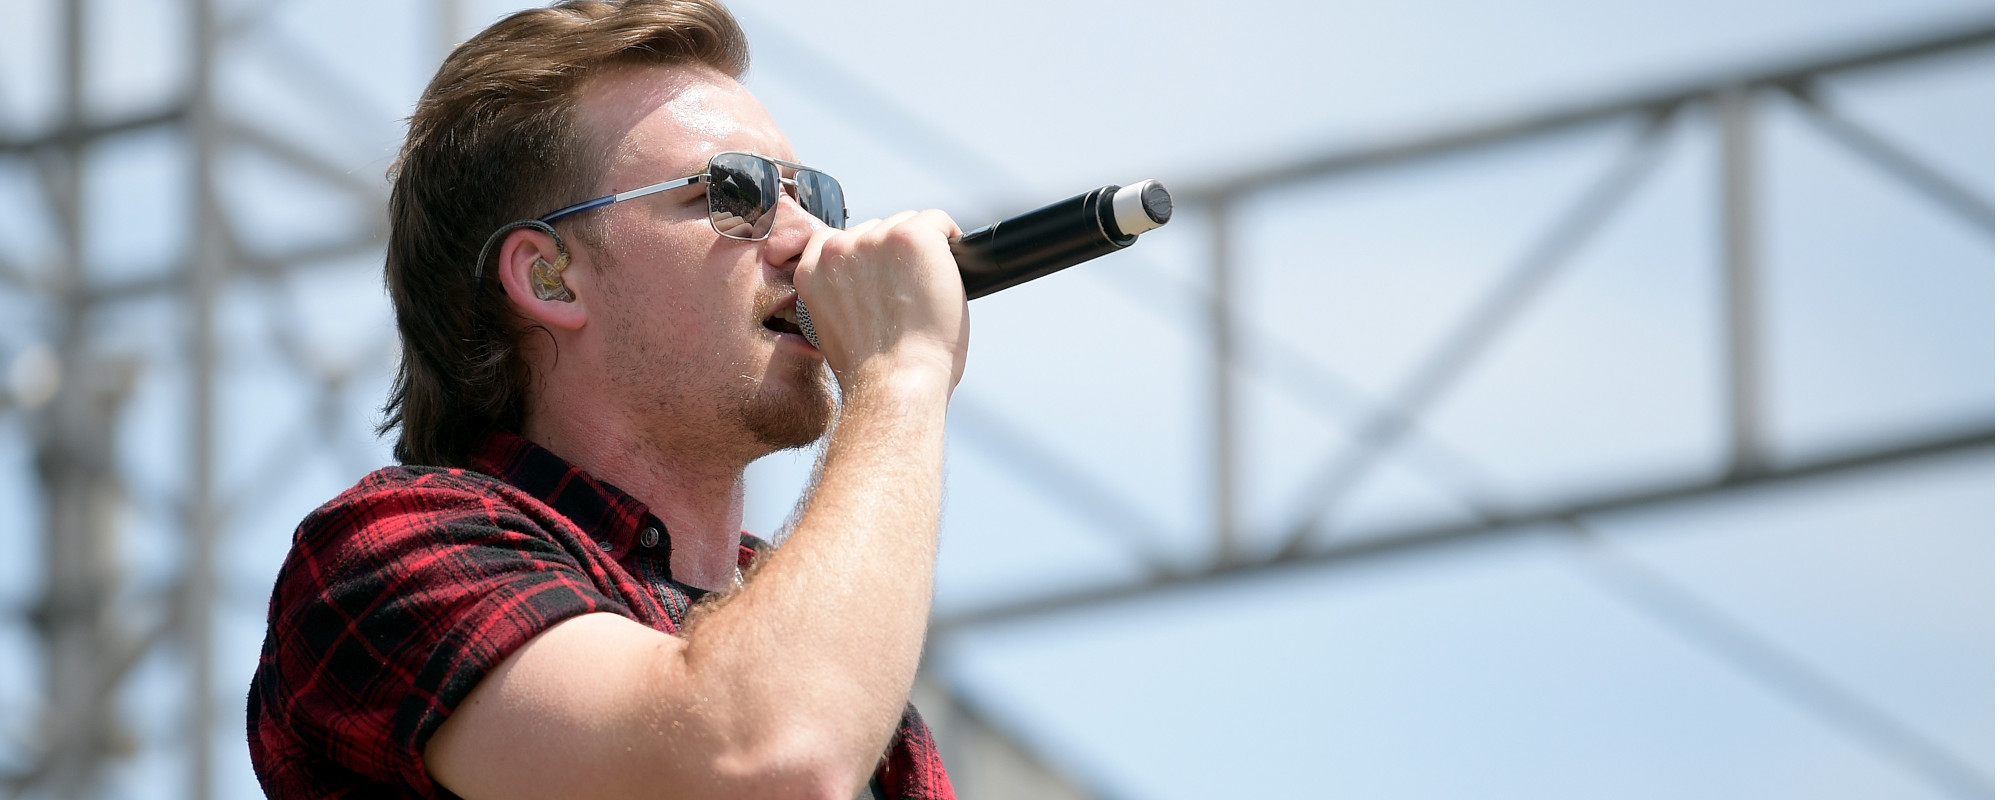 Morgan Wallen’s Ex-Label Responds After Country Star Slams Them for “Gross, Greedy” Music Release Against His Wishes